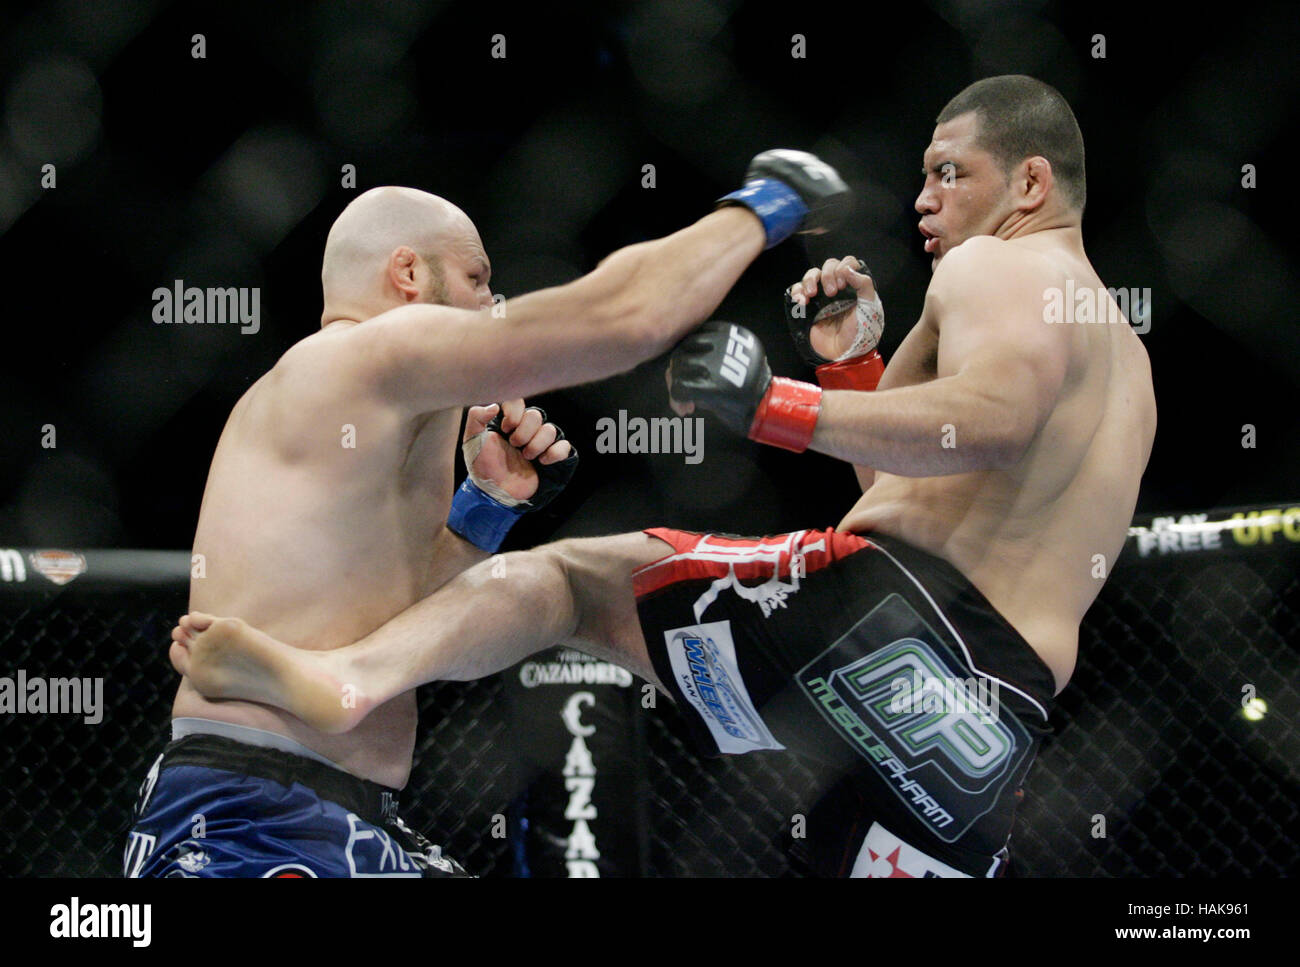 Cain Velasquez, right, fights Ben Rothwell at UFC 104 at the Staples Center in Los Angeles, California, on October 24, 2009. Francis Specker Stock Photo